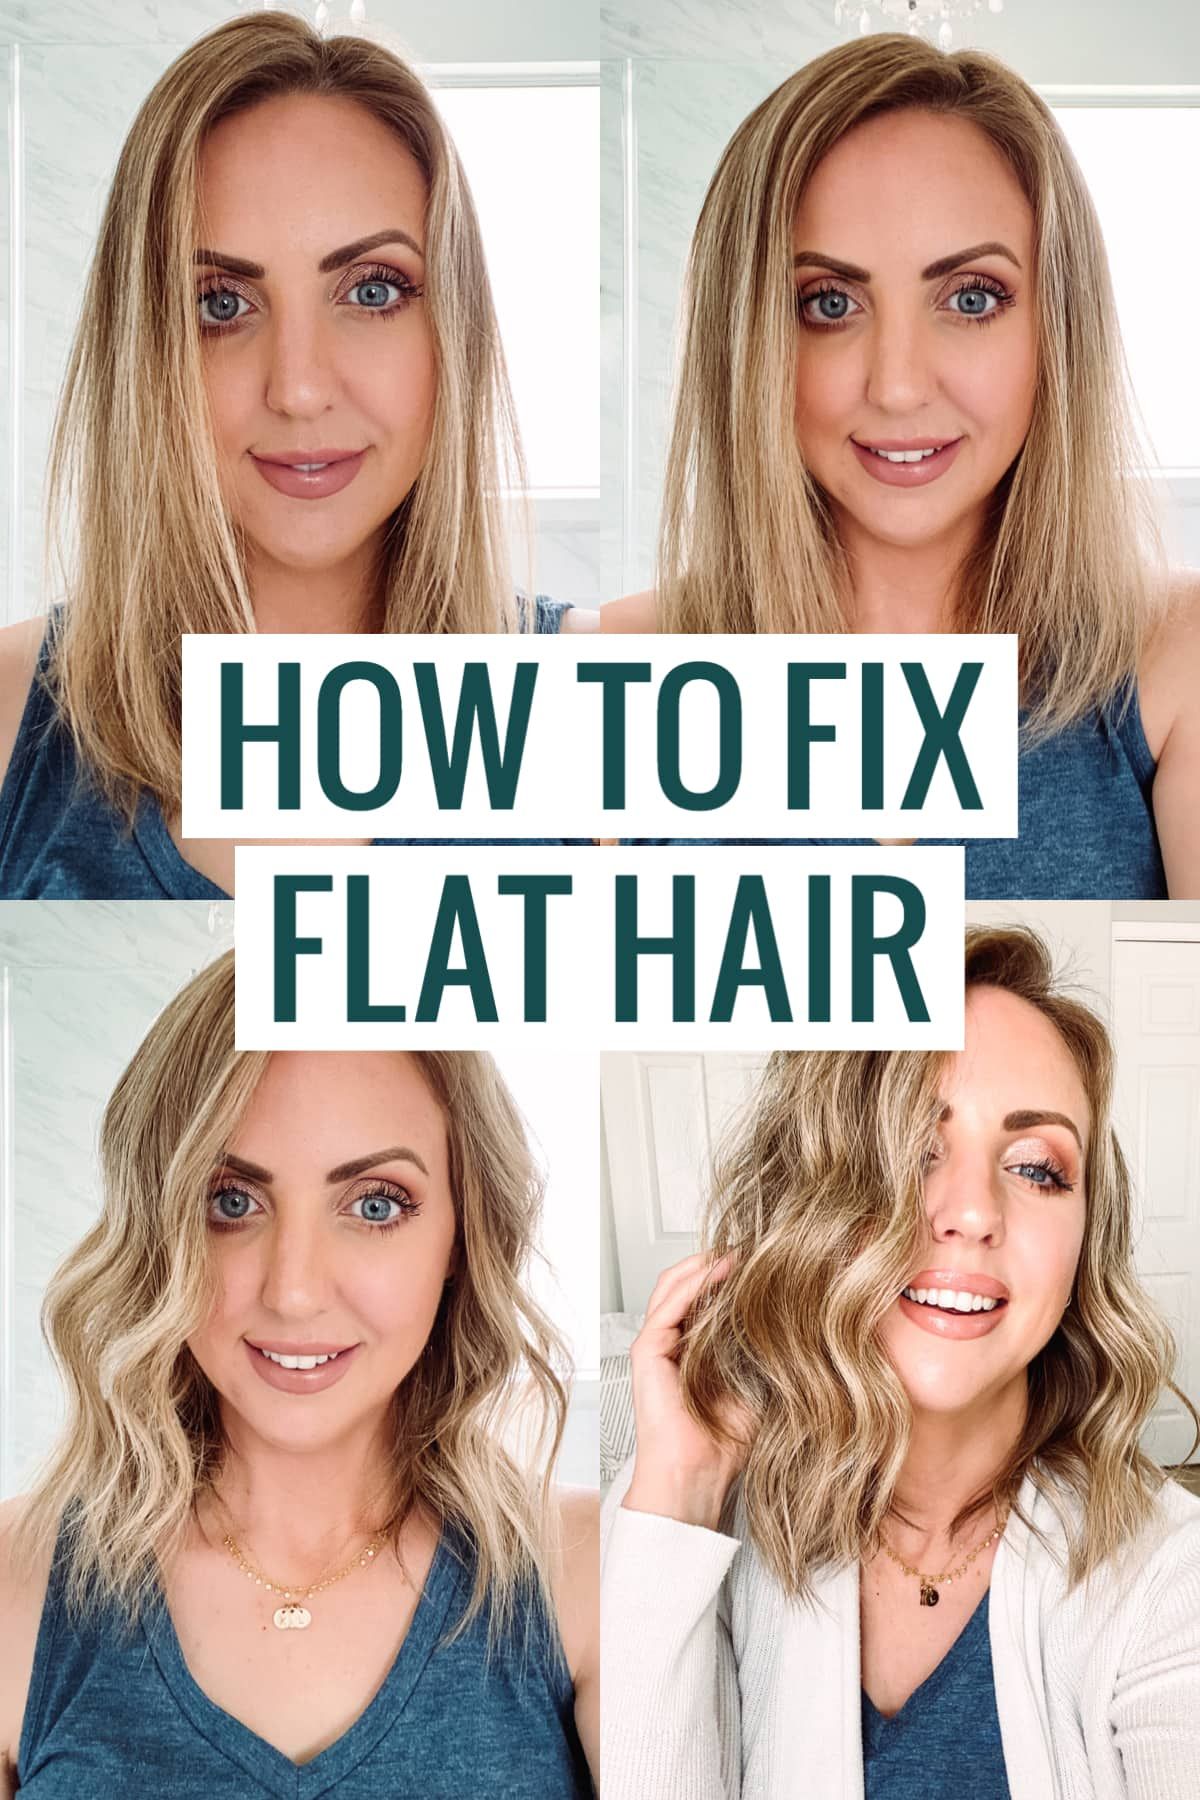 How to Fix Flat Hair